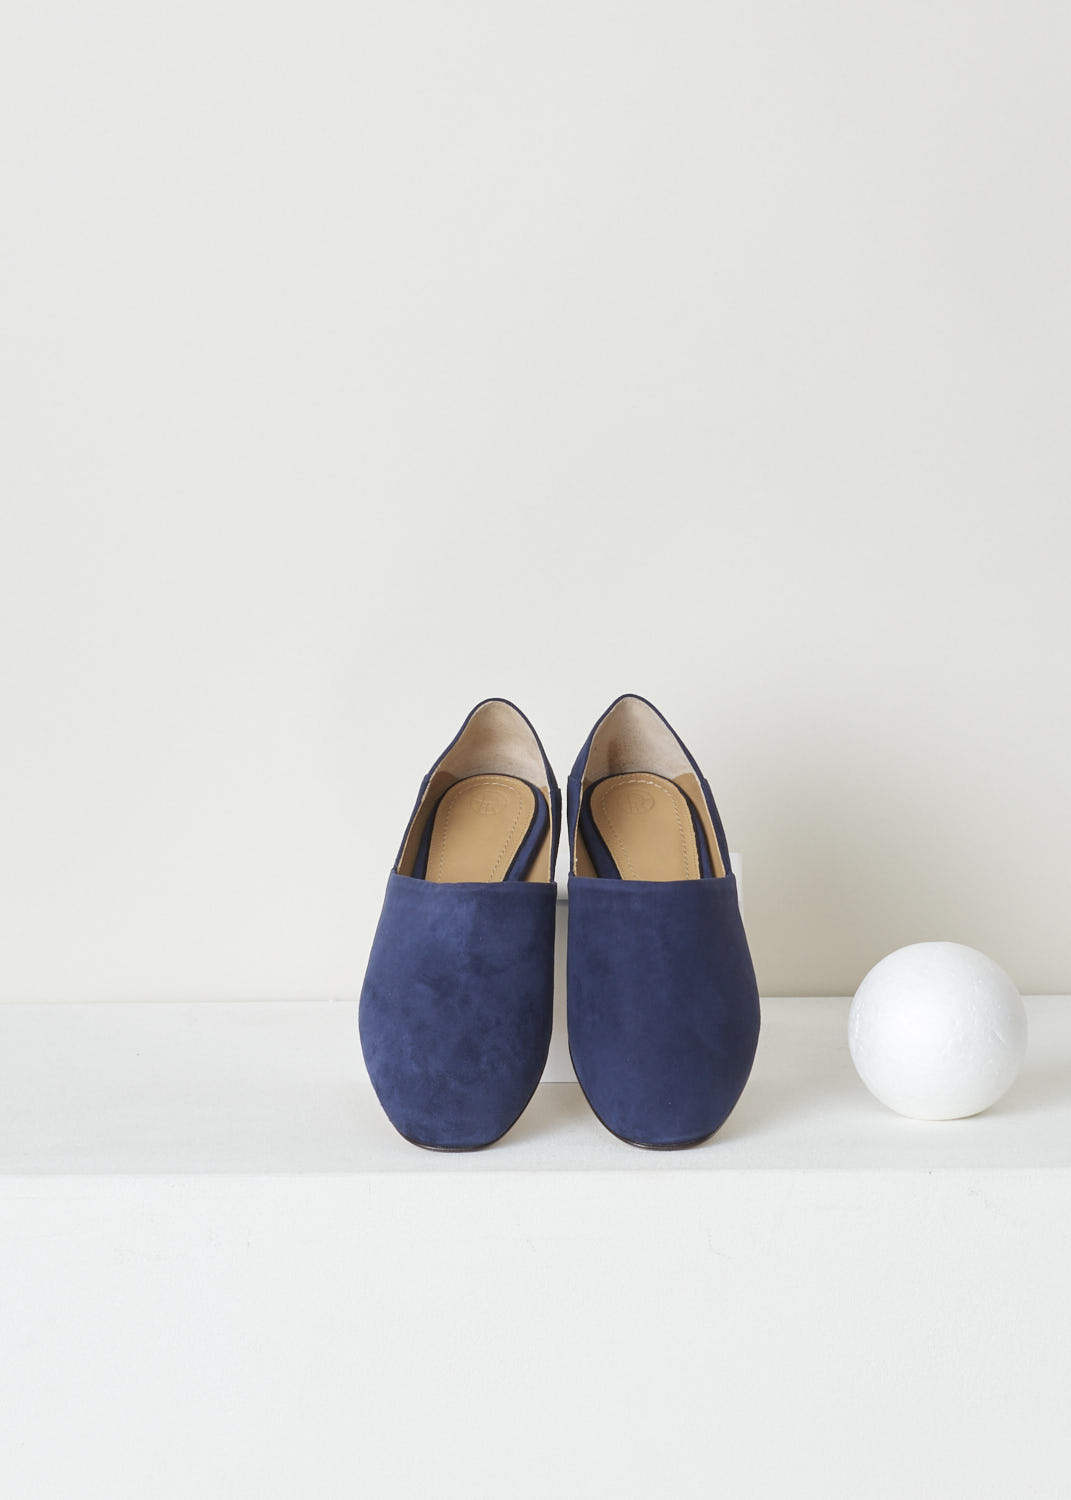 THE ROW, NAVY BLUE SUEDE SLIPPER, NOELLE_F1000_L25_NVY, Blue, Top, Minimalistic navy blue suede slipper. The slip-in model features a rounded toe vamp. The sober design is exactly what makes these shoes so beautiful.
